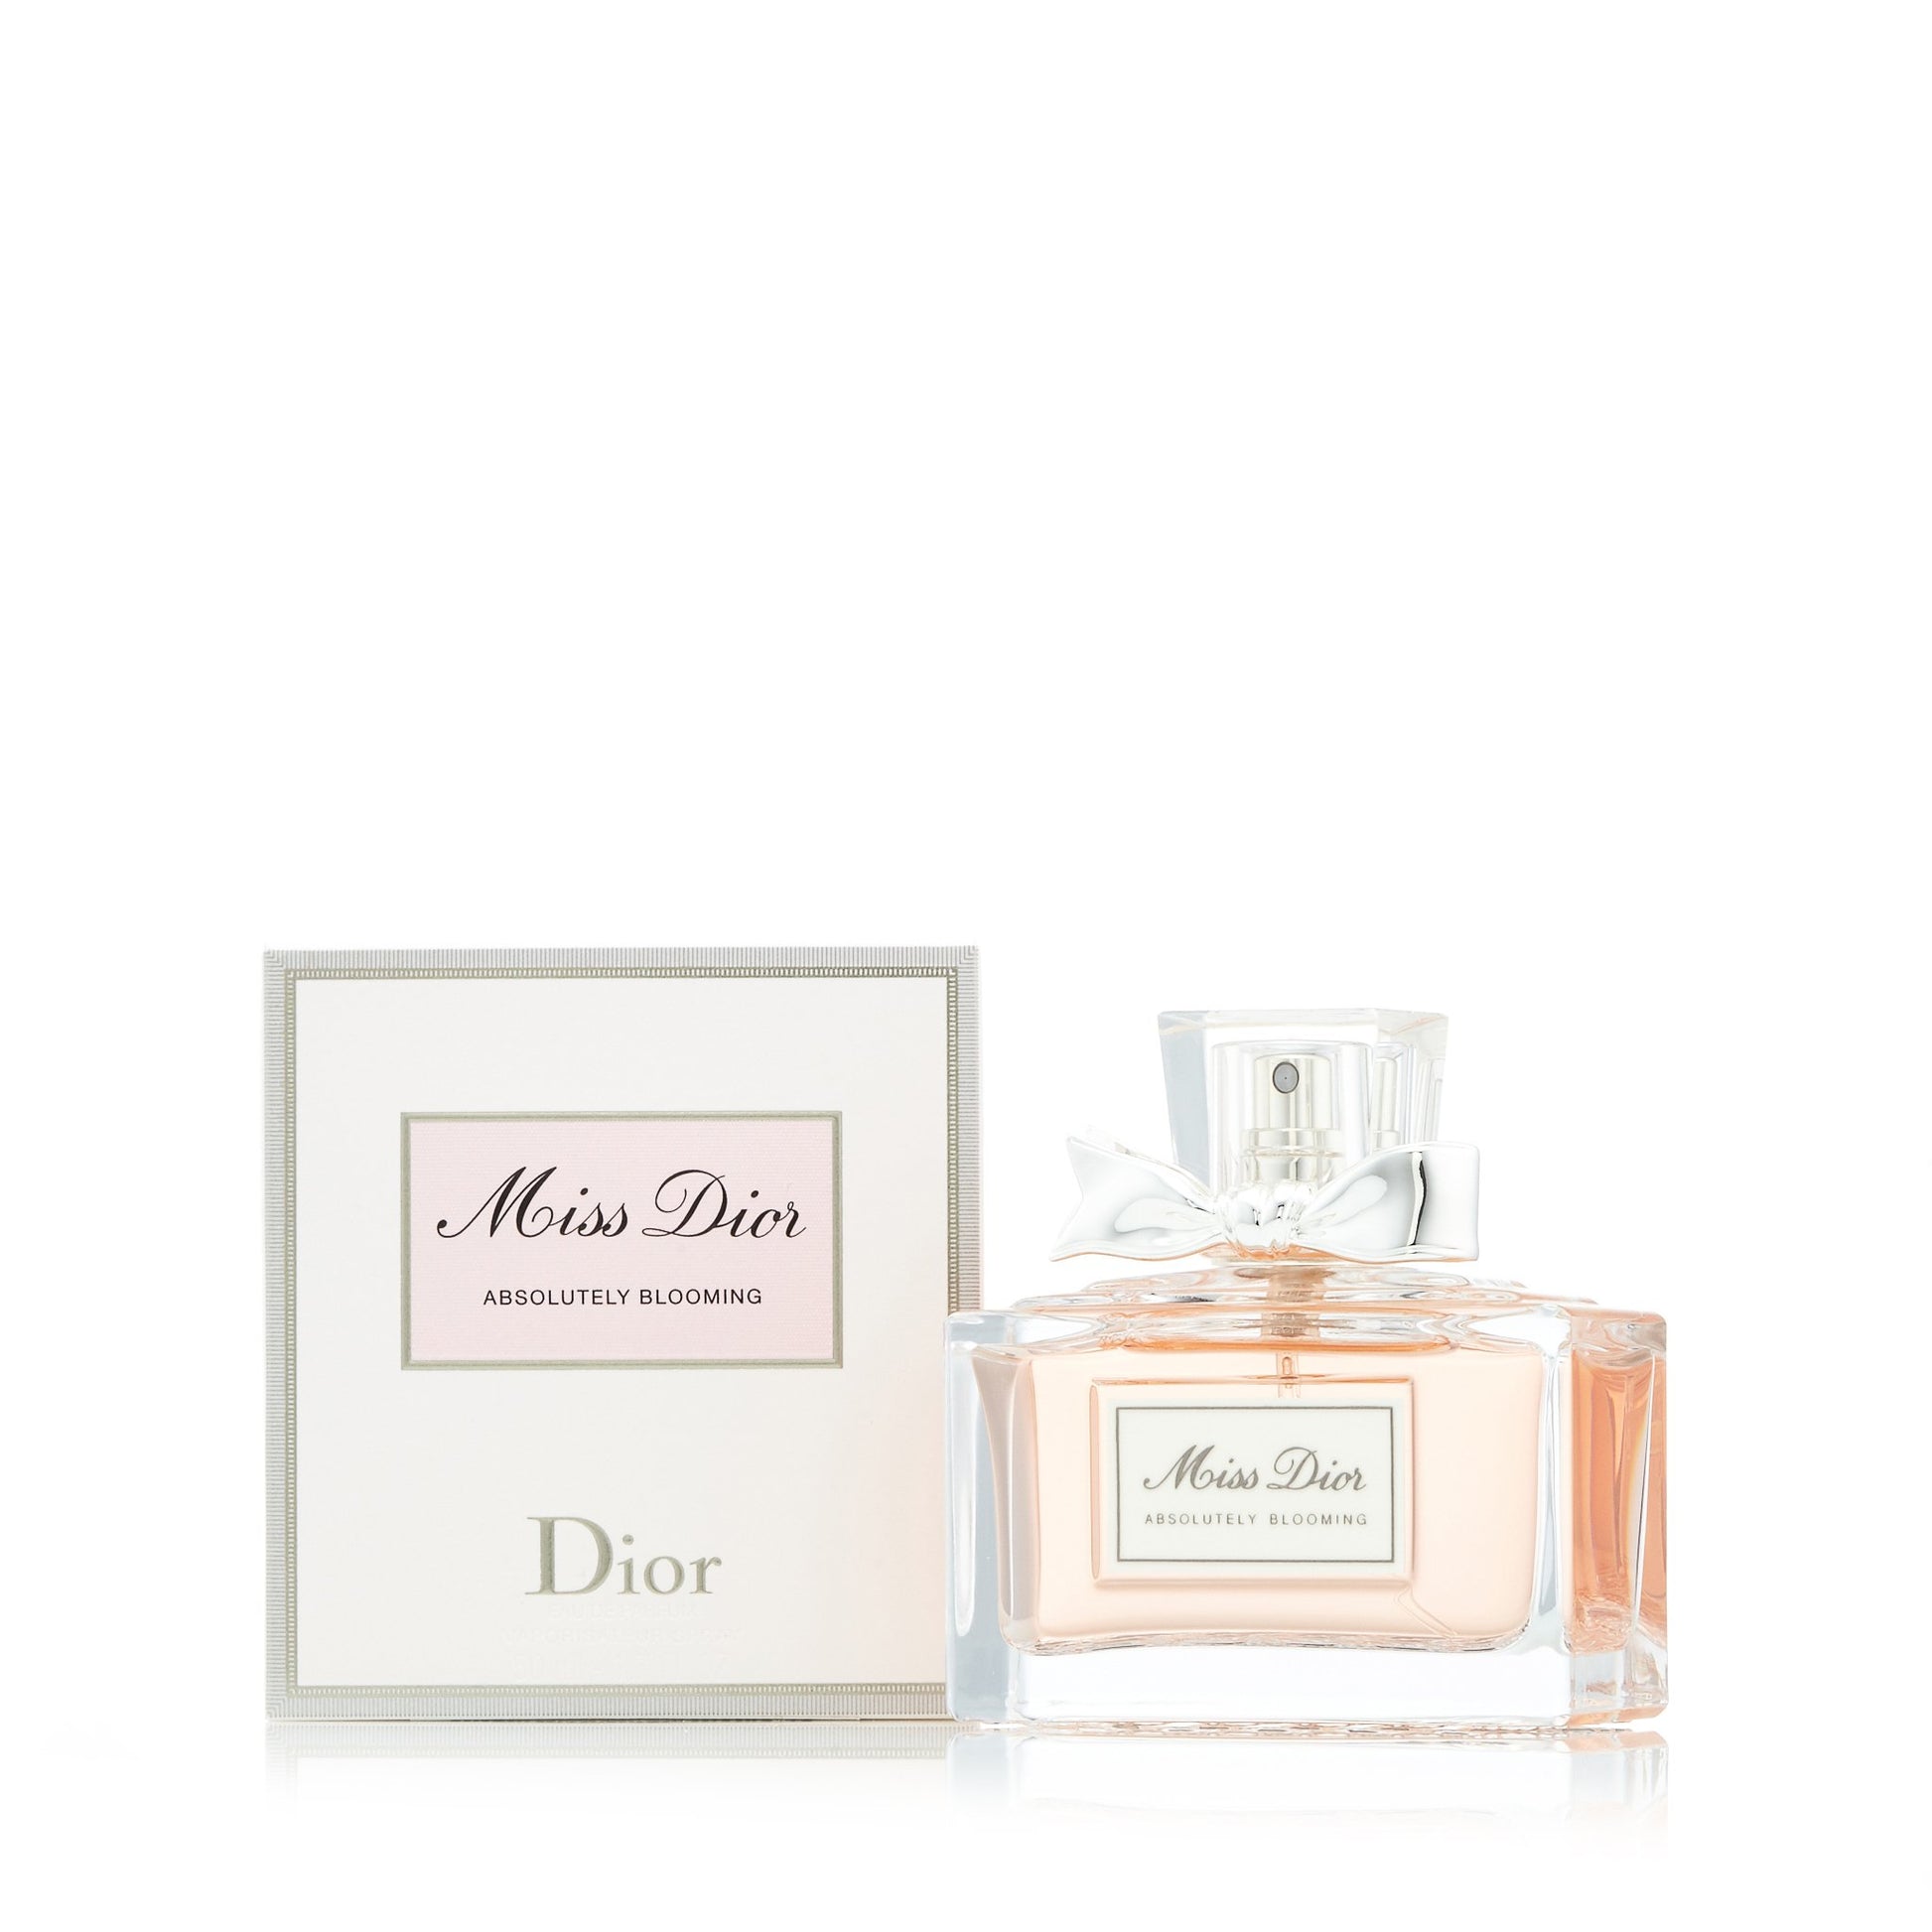 Miss Dior Absolutely Blooming Eau de Parfum Spray for Women by Dior 1.7 oz. Click to open in modal